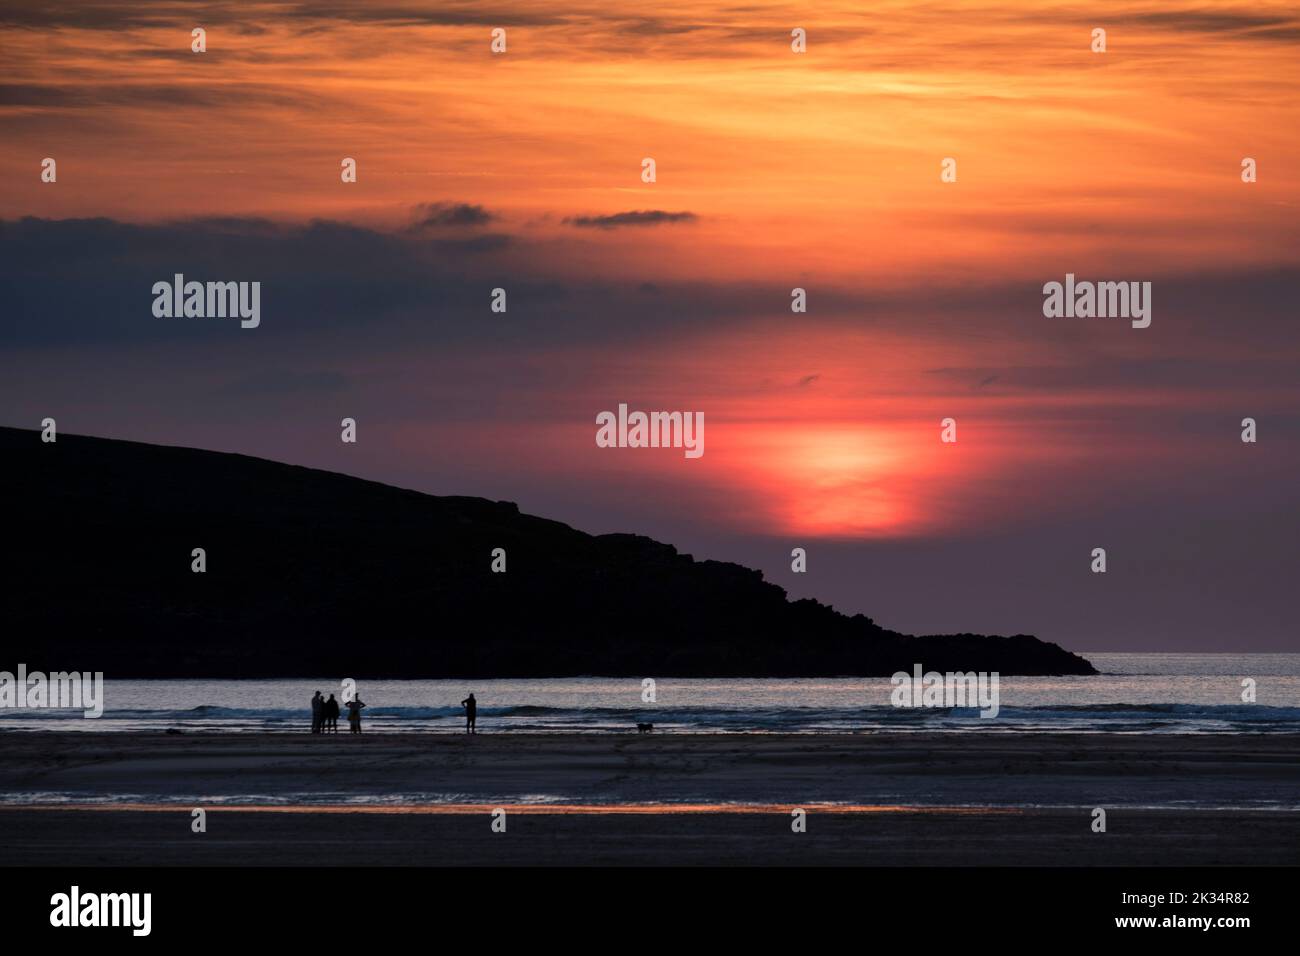 Sunset on Crantock beach in North Cornwall looking out to the Atlantic Ocean. Stock Photo